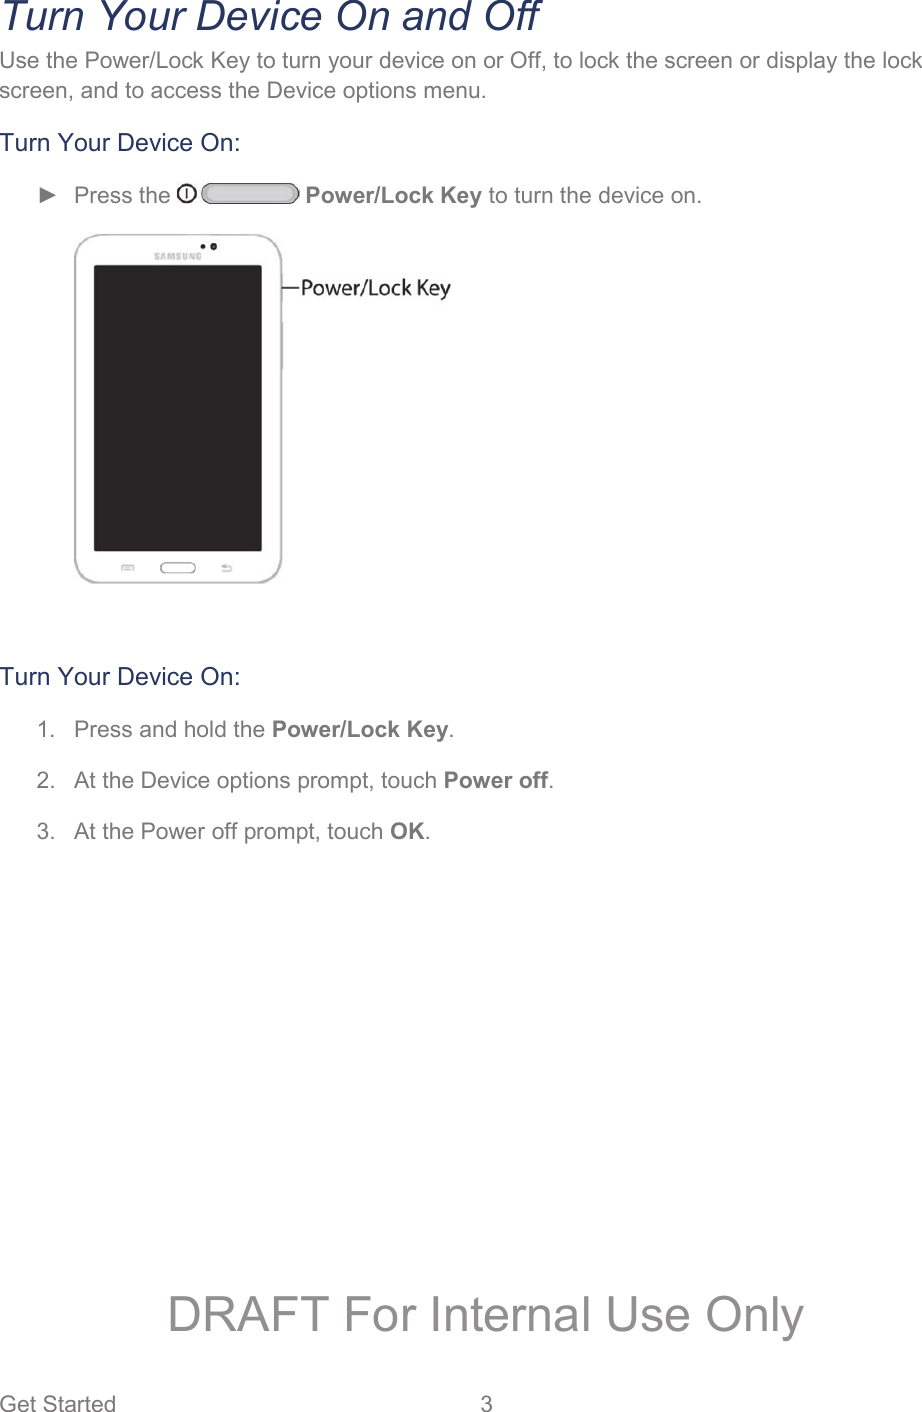 Get Started  3   Turn Your Device On and Off Use the Power/Lock Key to turn your device on or Off, to lock the screen or display the lock screen, and to access the Device options menu. Turn Your Device On: ► Press the   Power/Lock Key to turn the device on.   Turn Your Device On: 1.  Press and hold the Power/Lock Key. 2.  At the Device options prompt, touch Power off. 3.  At the Power off prompt, touch OK. DRAFT For Internal Use Only